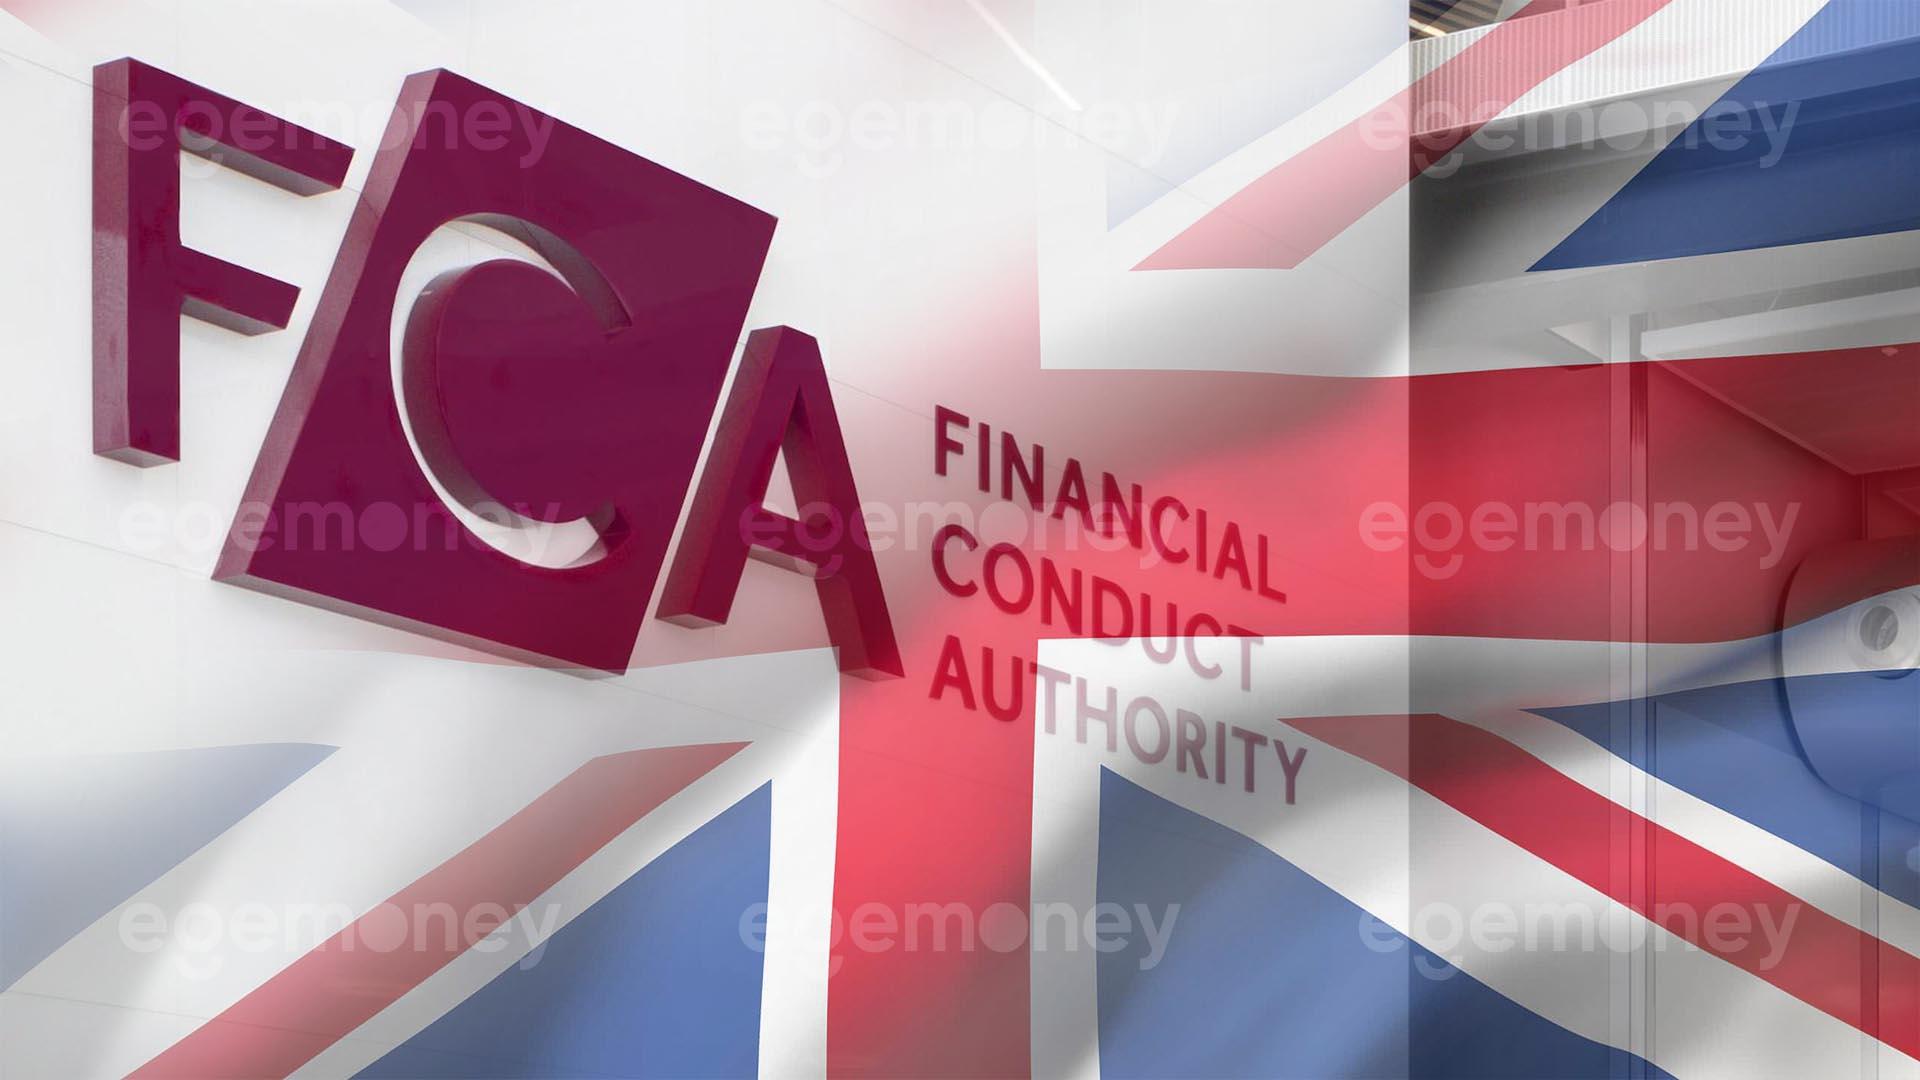 UK’s Financial Conduct Authority Says Crypto Firms Fall Short on New Ad Rules